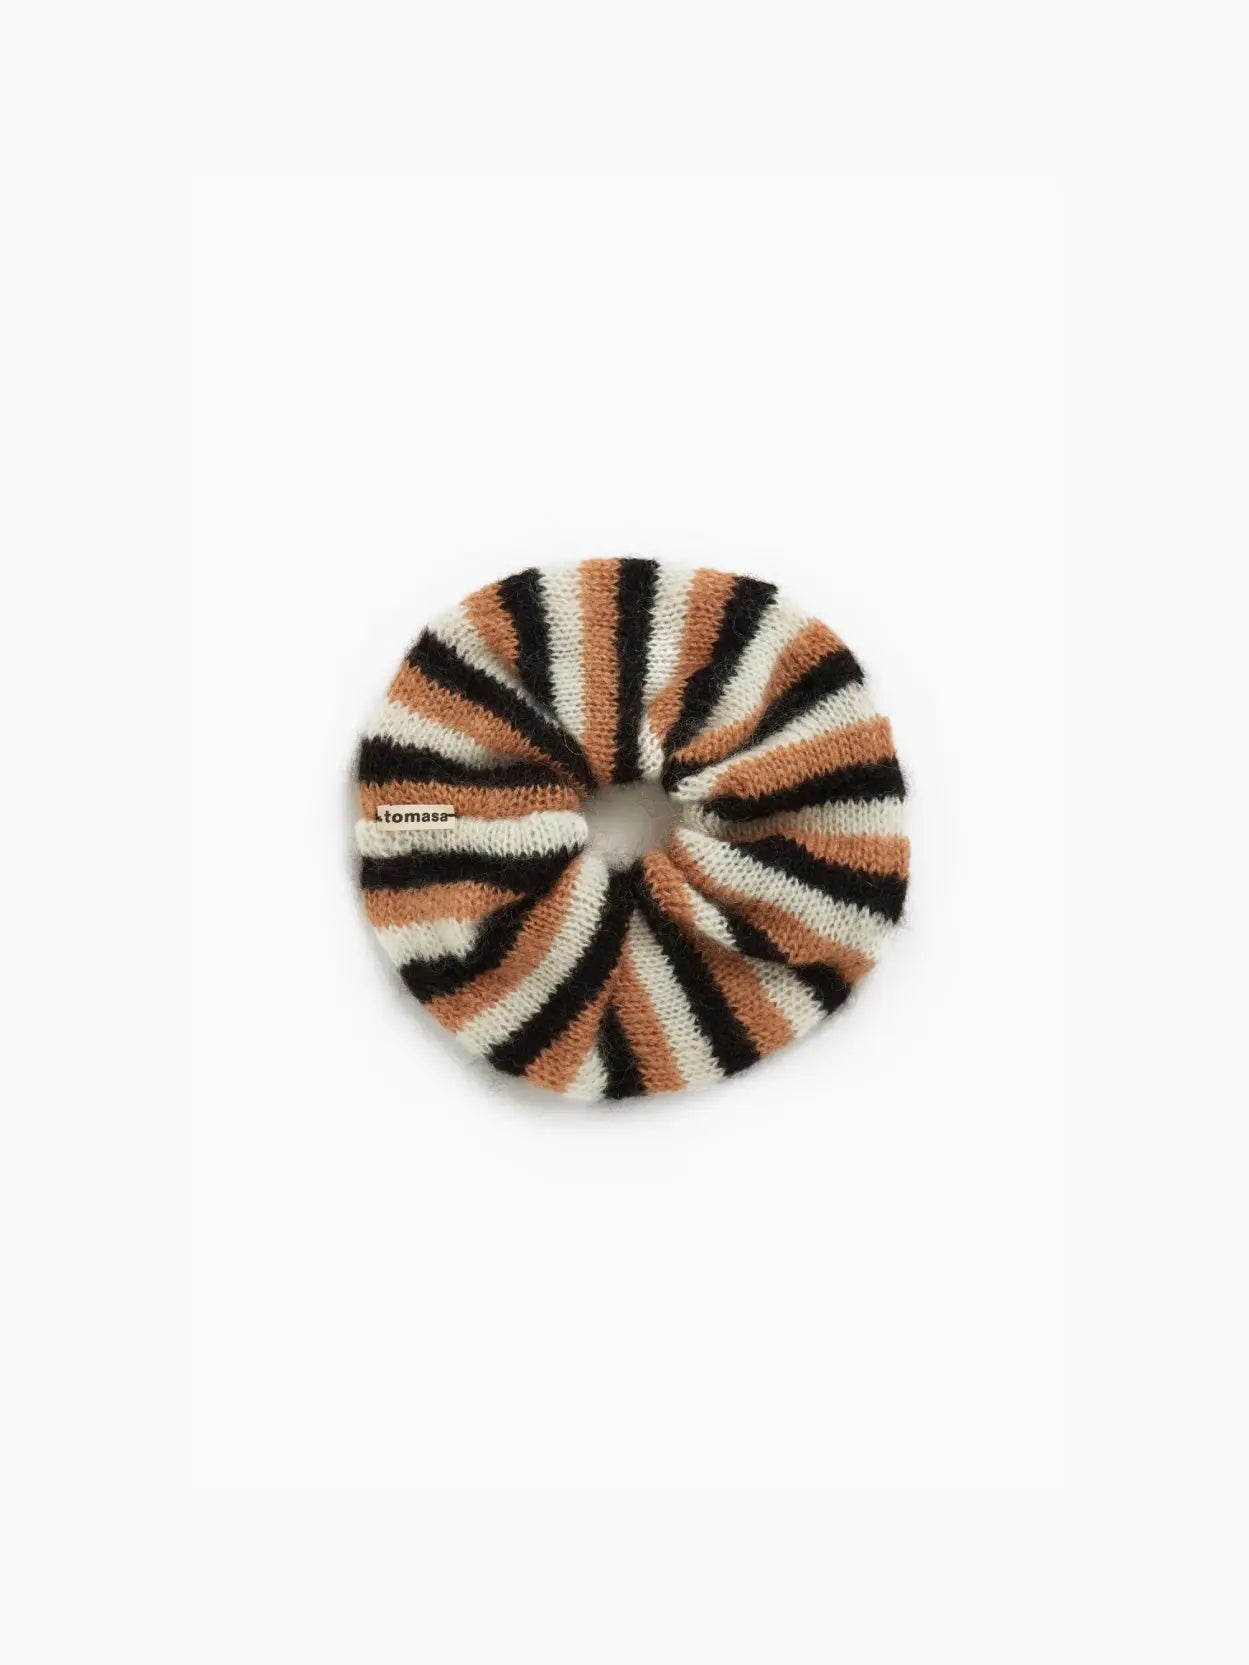 A fuzzy round Tomasa Eugenia Scrunchie with alternating stripes of cream, brown, and black is available at Bassalstore. The scrunchie has a soft texture and a tightly gathered center.